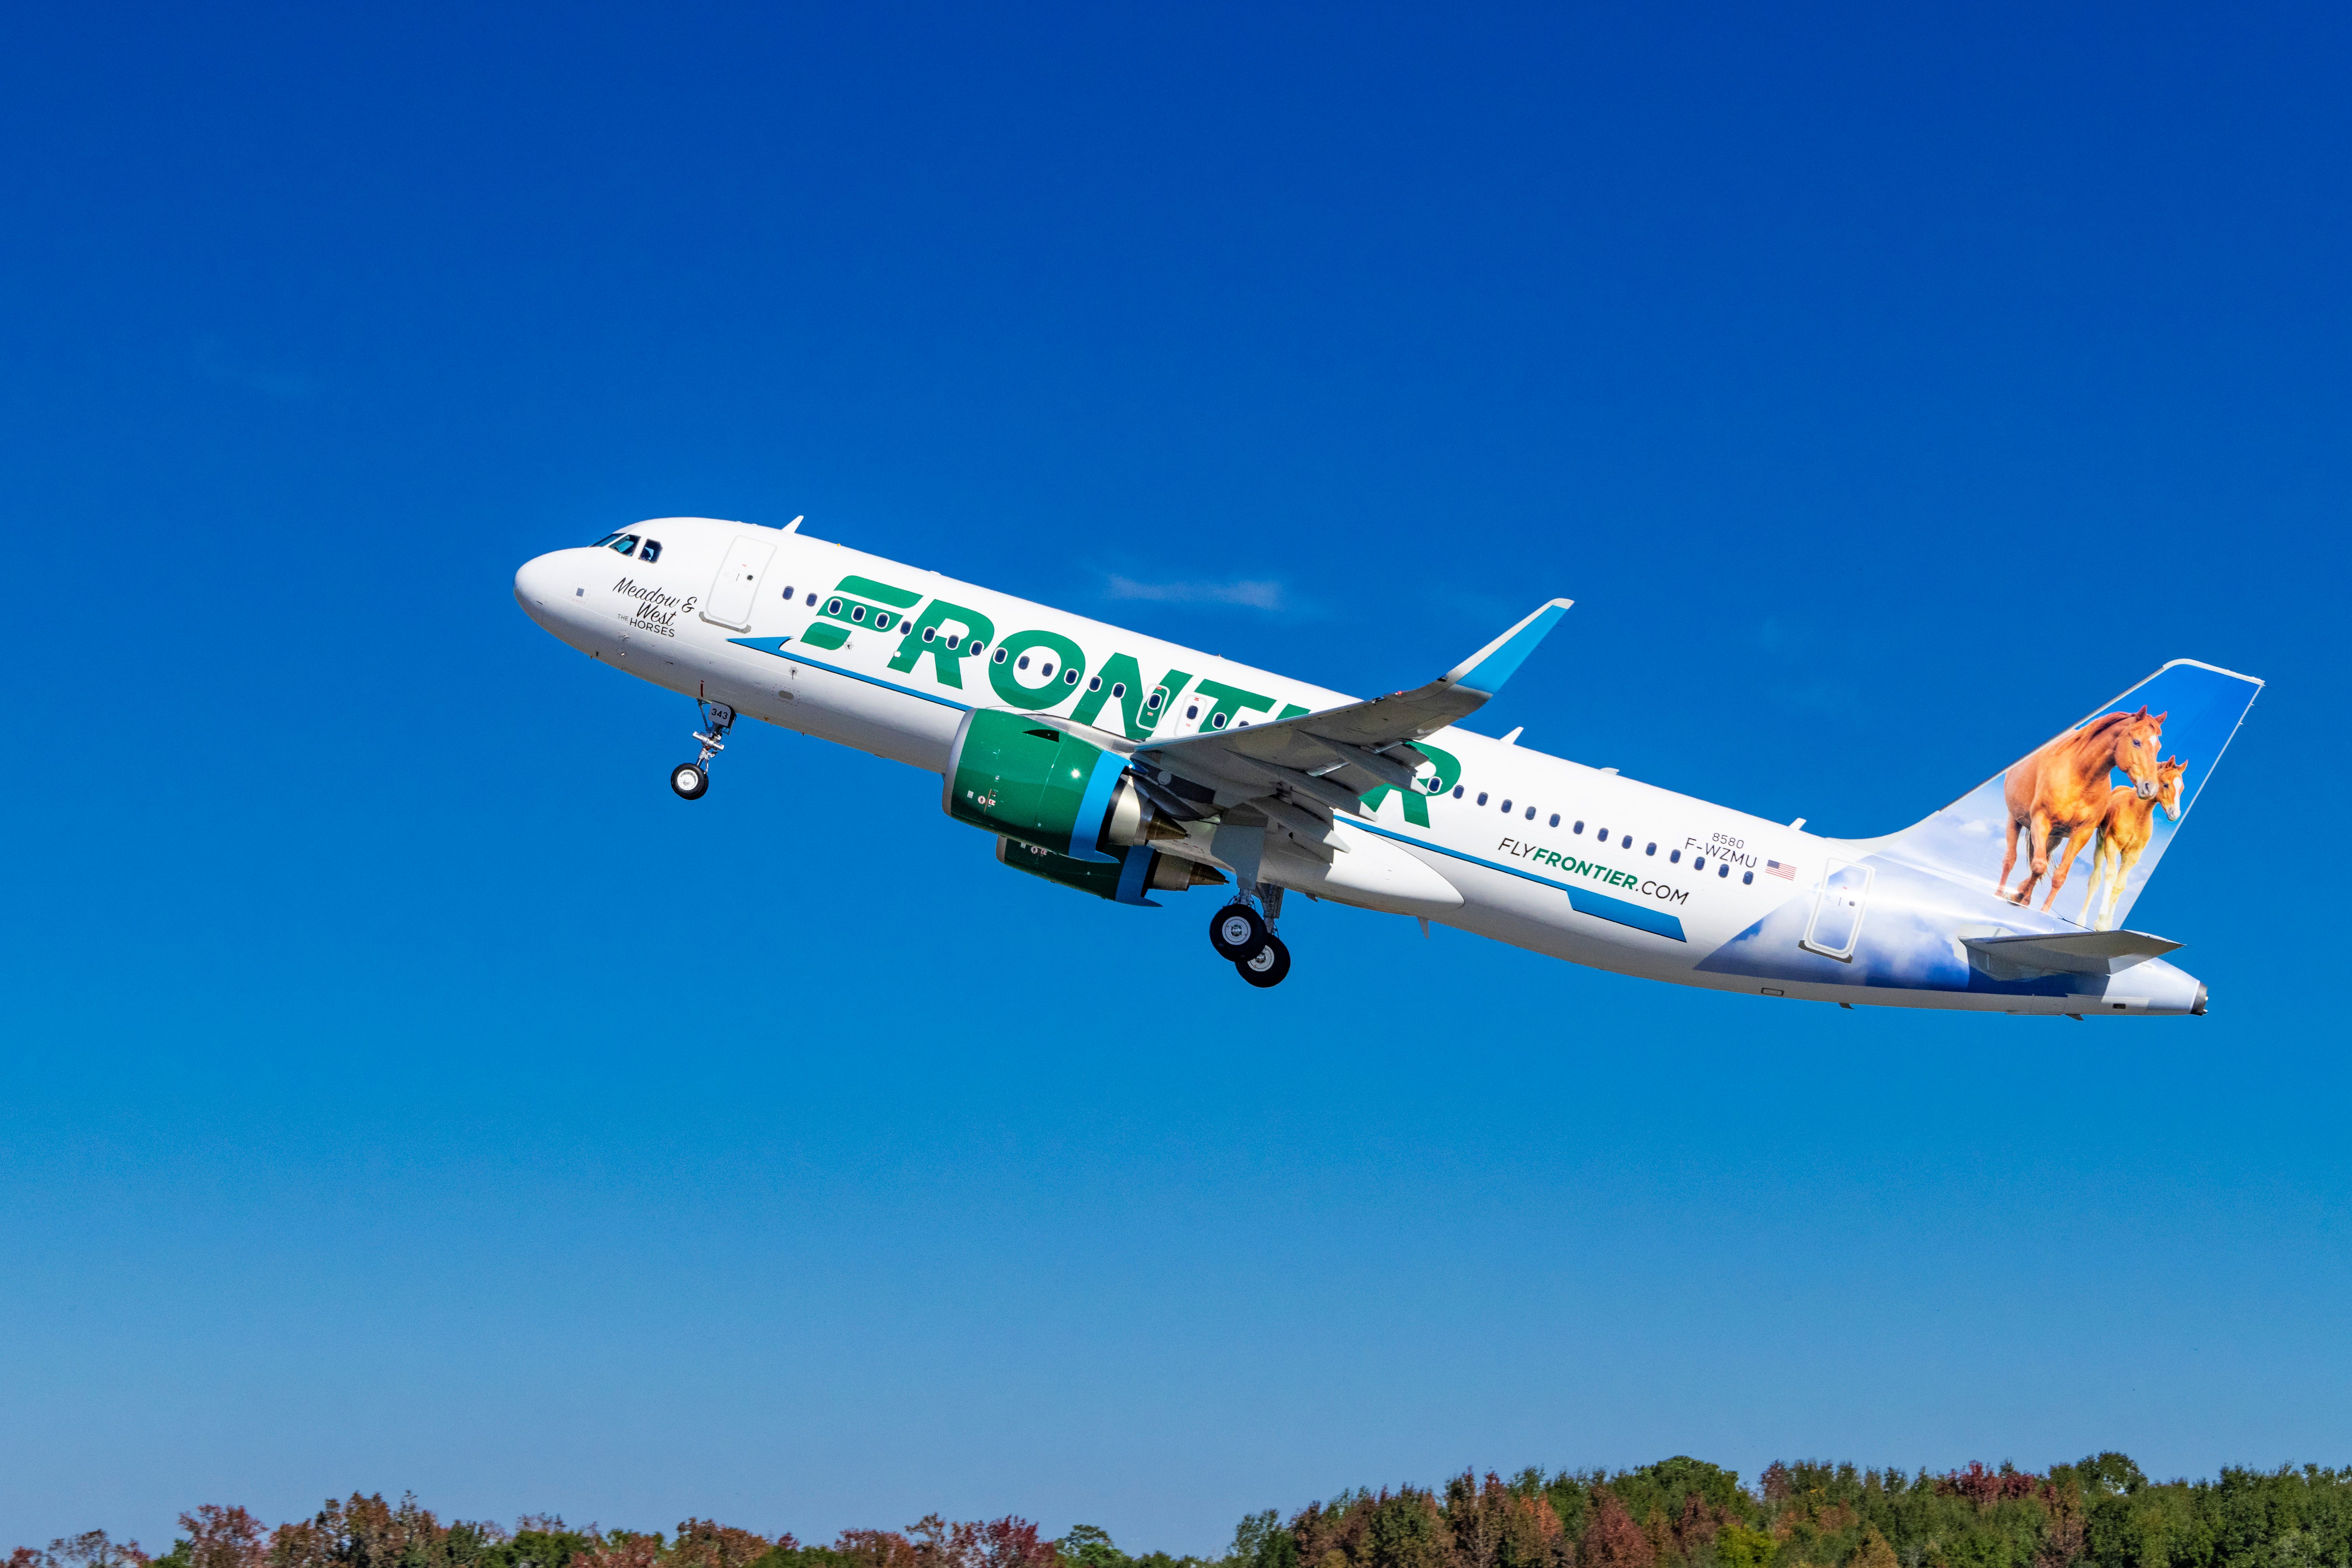 The A320neo Frontier Airlines